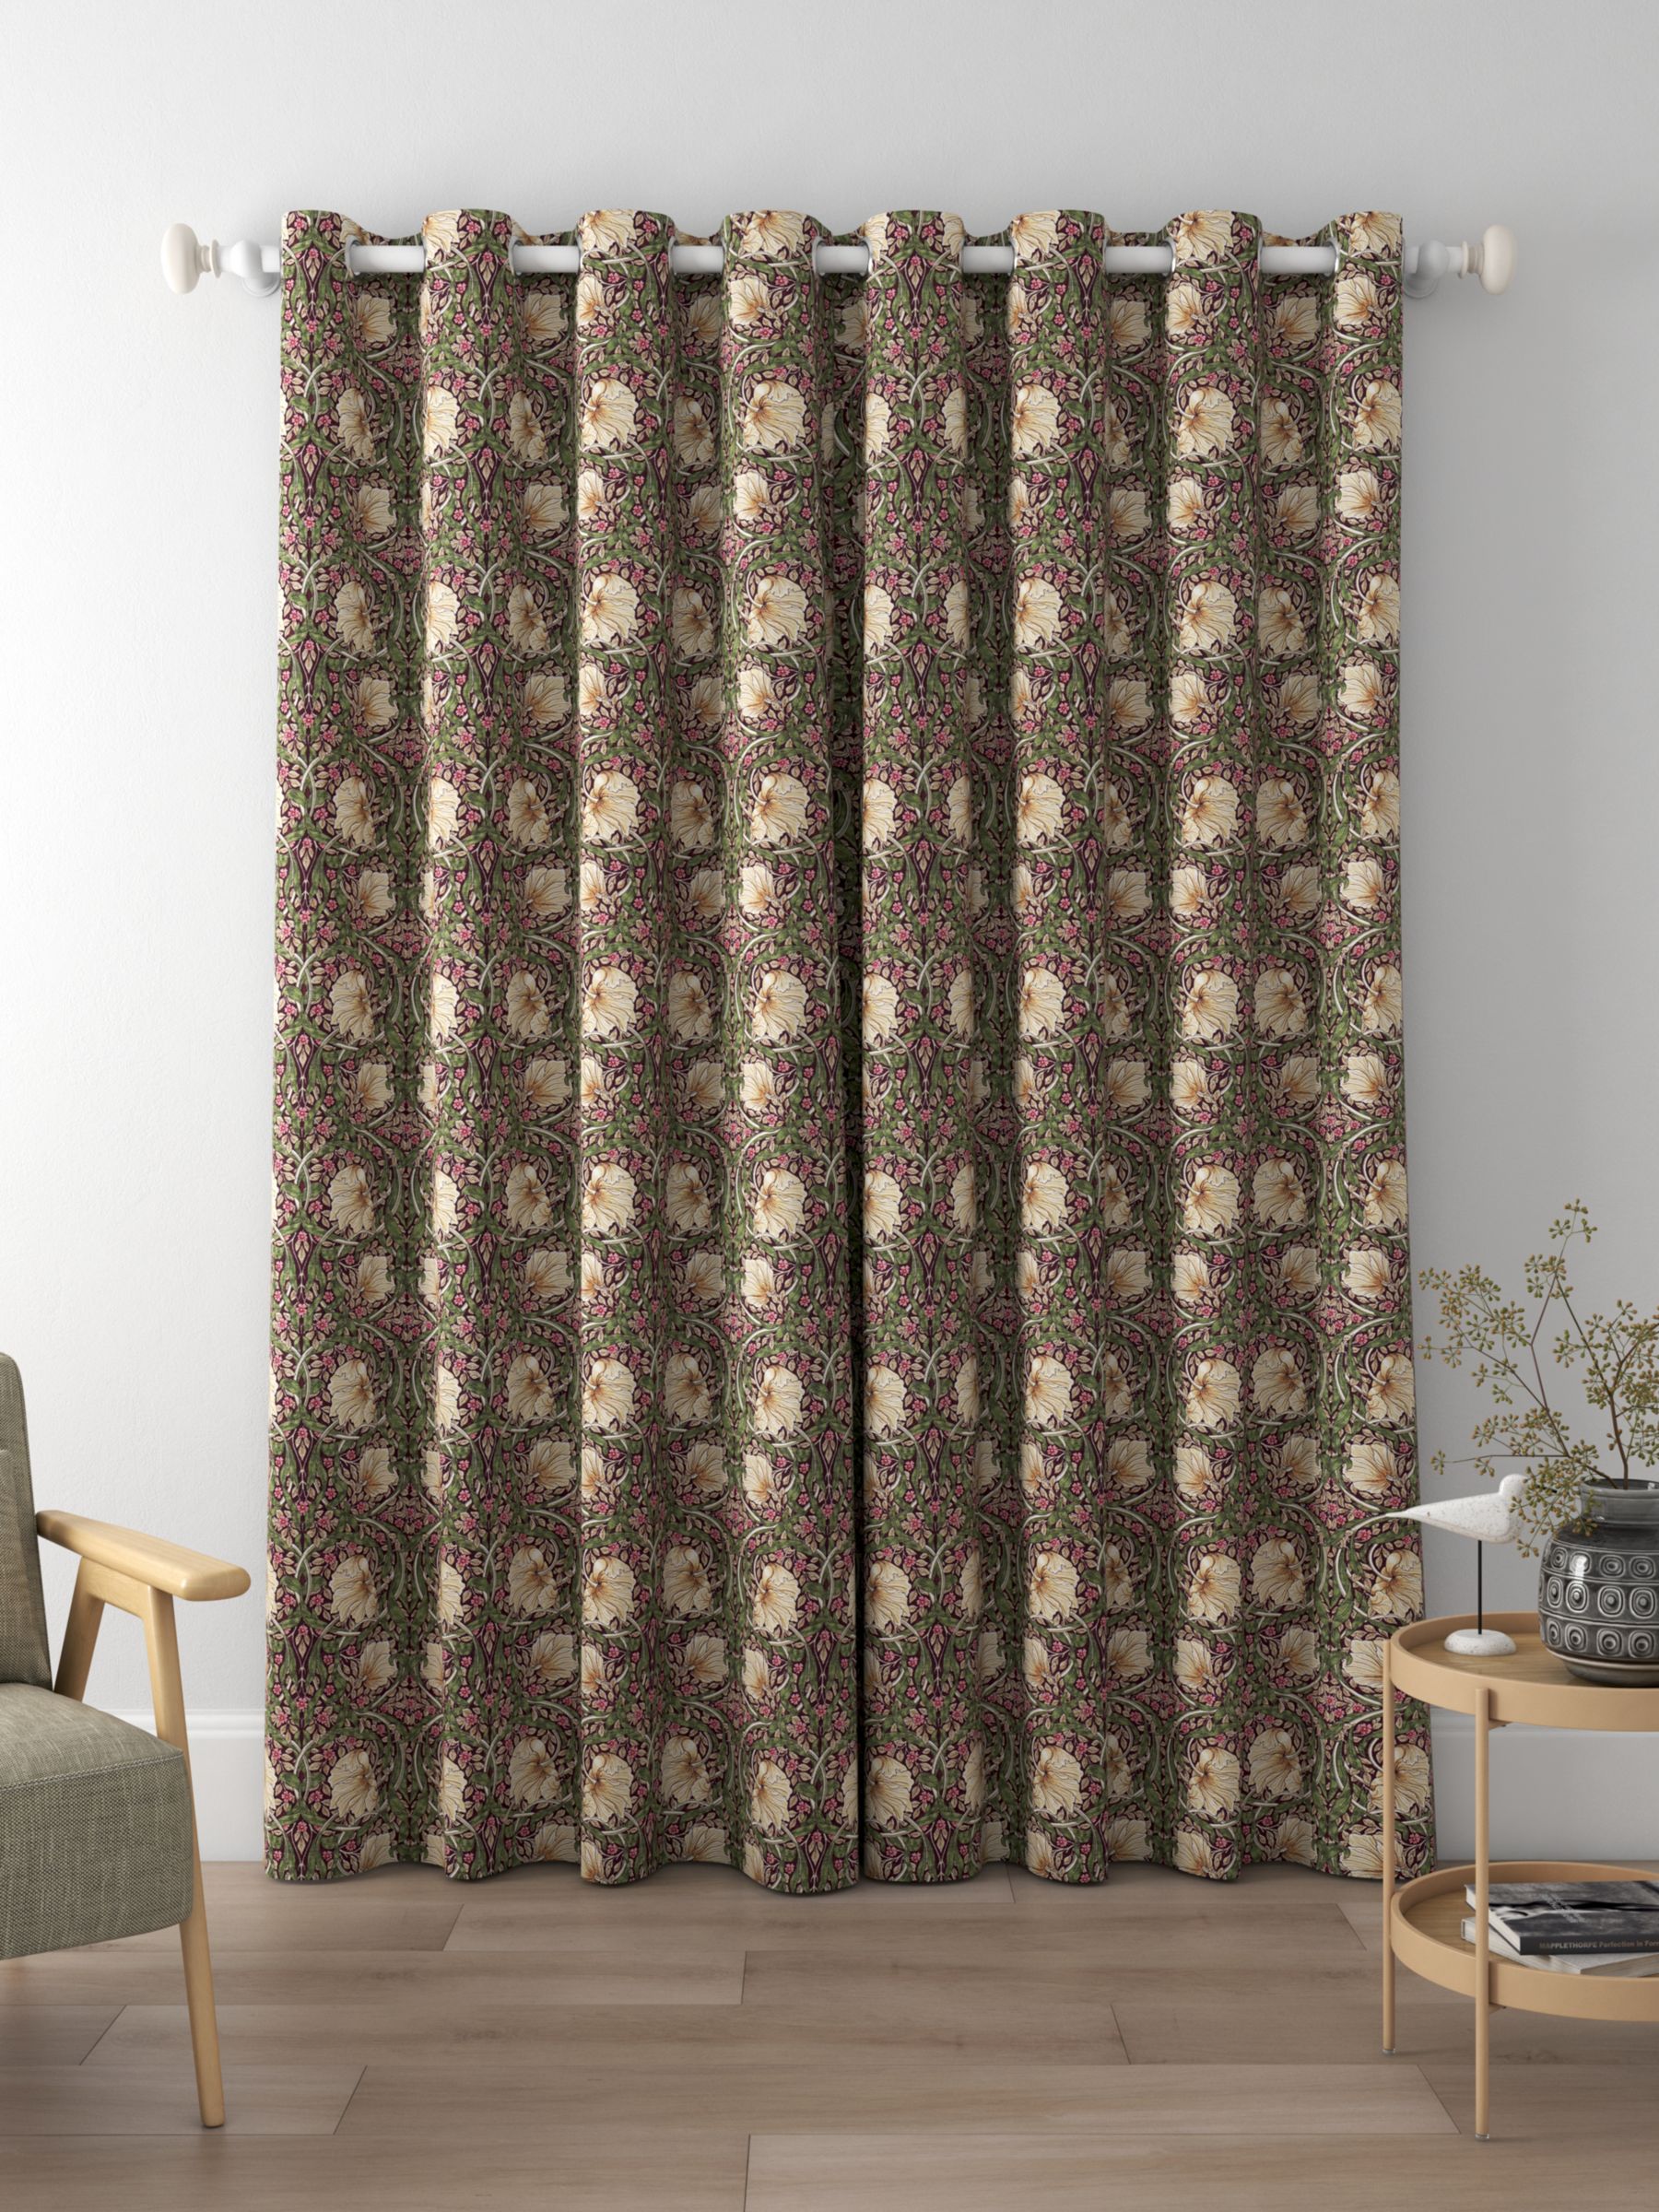 Morris & Co. Pimpernel Print Made to Measure Curtains, Aubergine/Olive